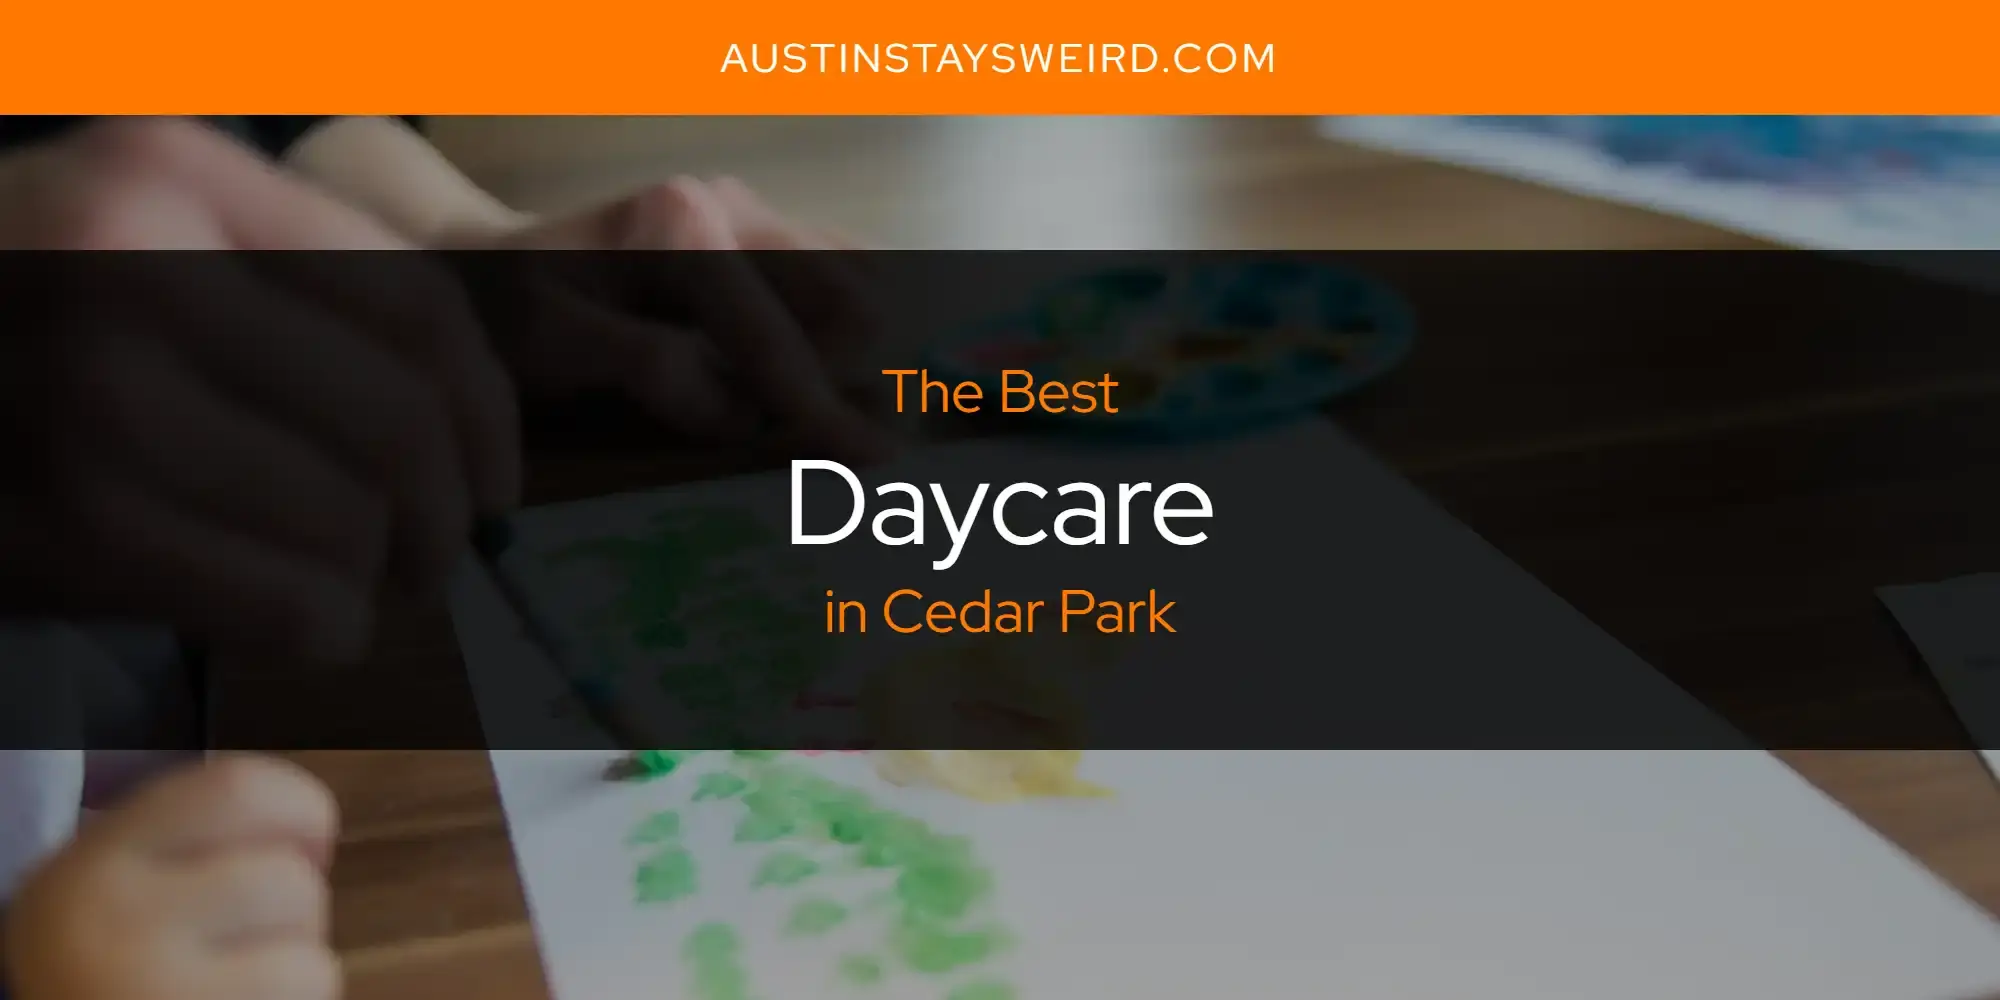 Best Daycare in Cedar Park? Here's the Top 8